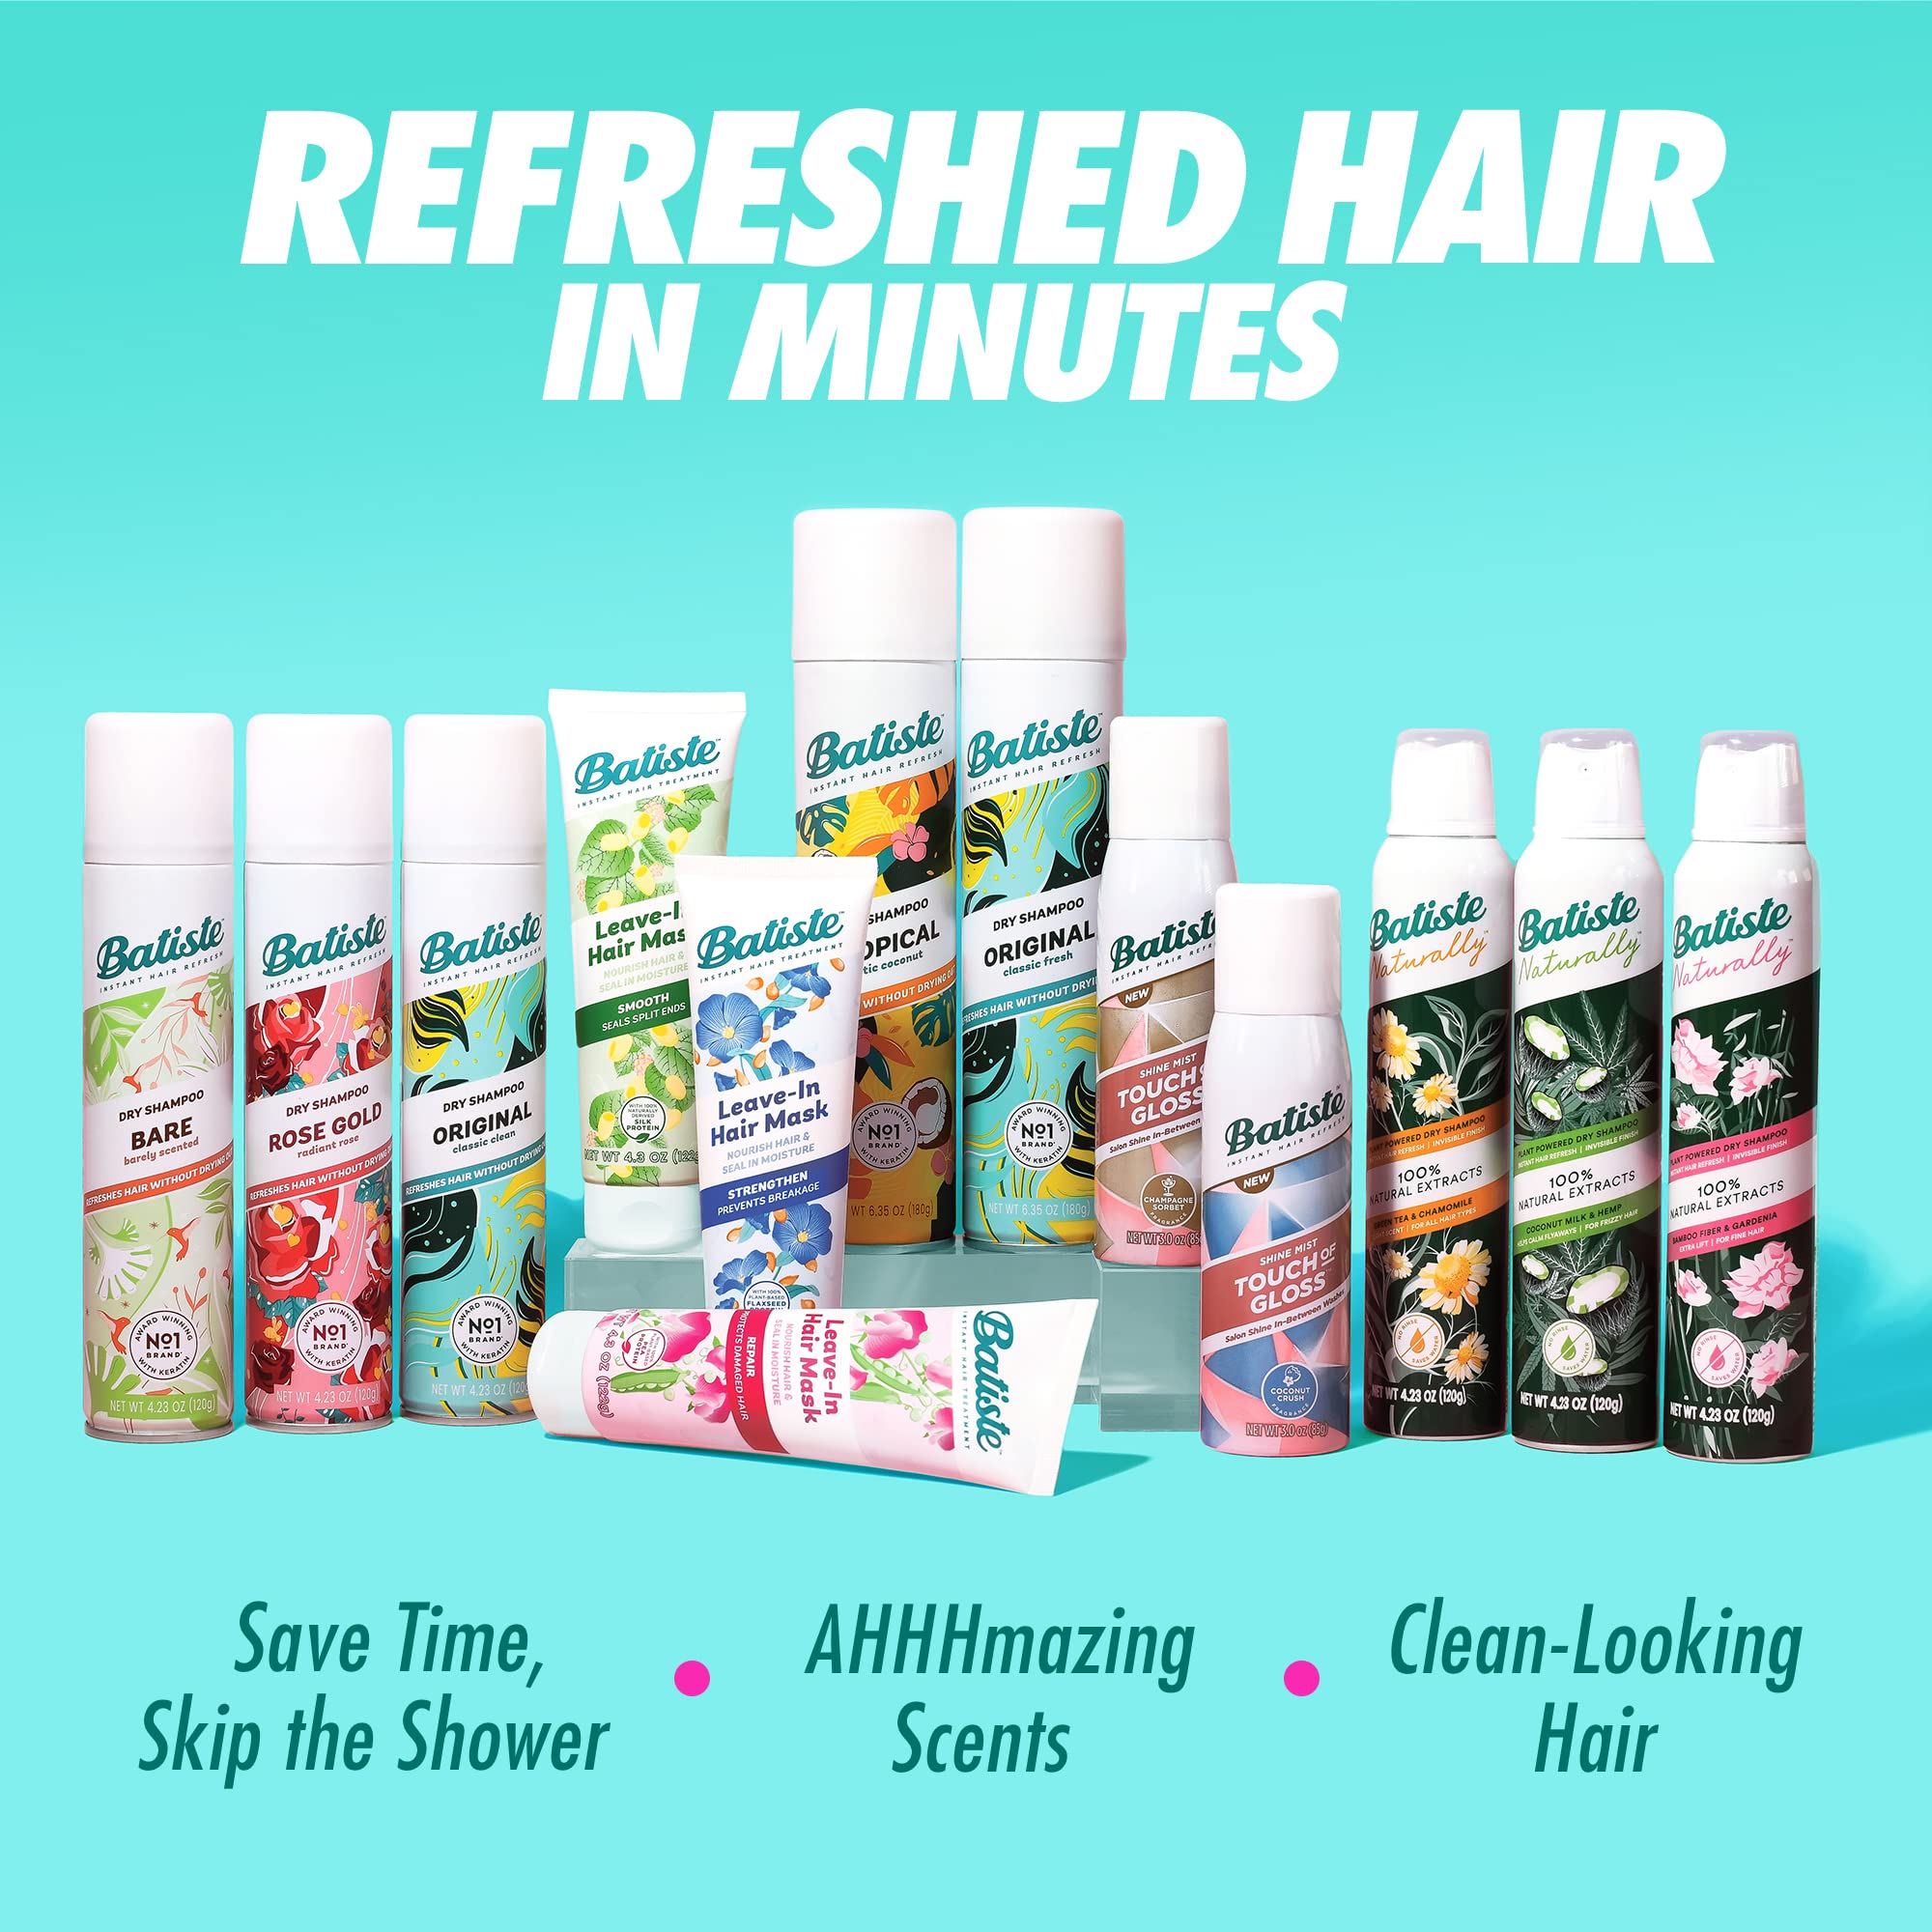 Batiste Overnight Deep Cleanse 200ml, Leave-In Deep Cleansing Dry Shampoo for Overnight Use, Absorbs Oil for Clean Looking Fresh Hair Overnight